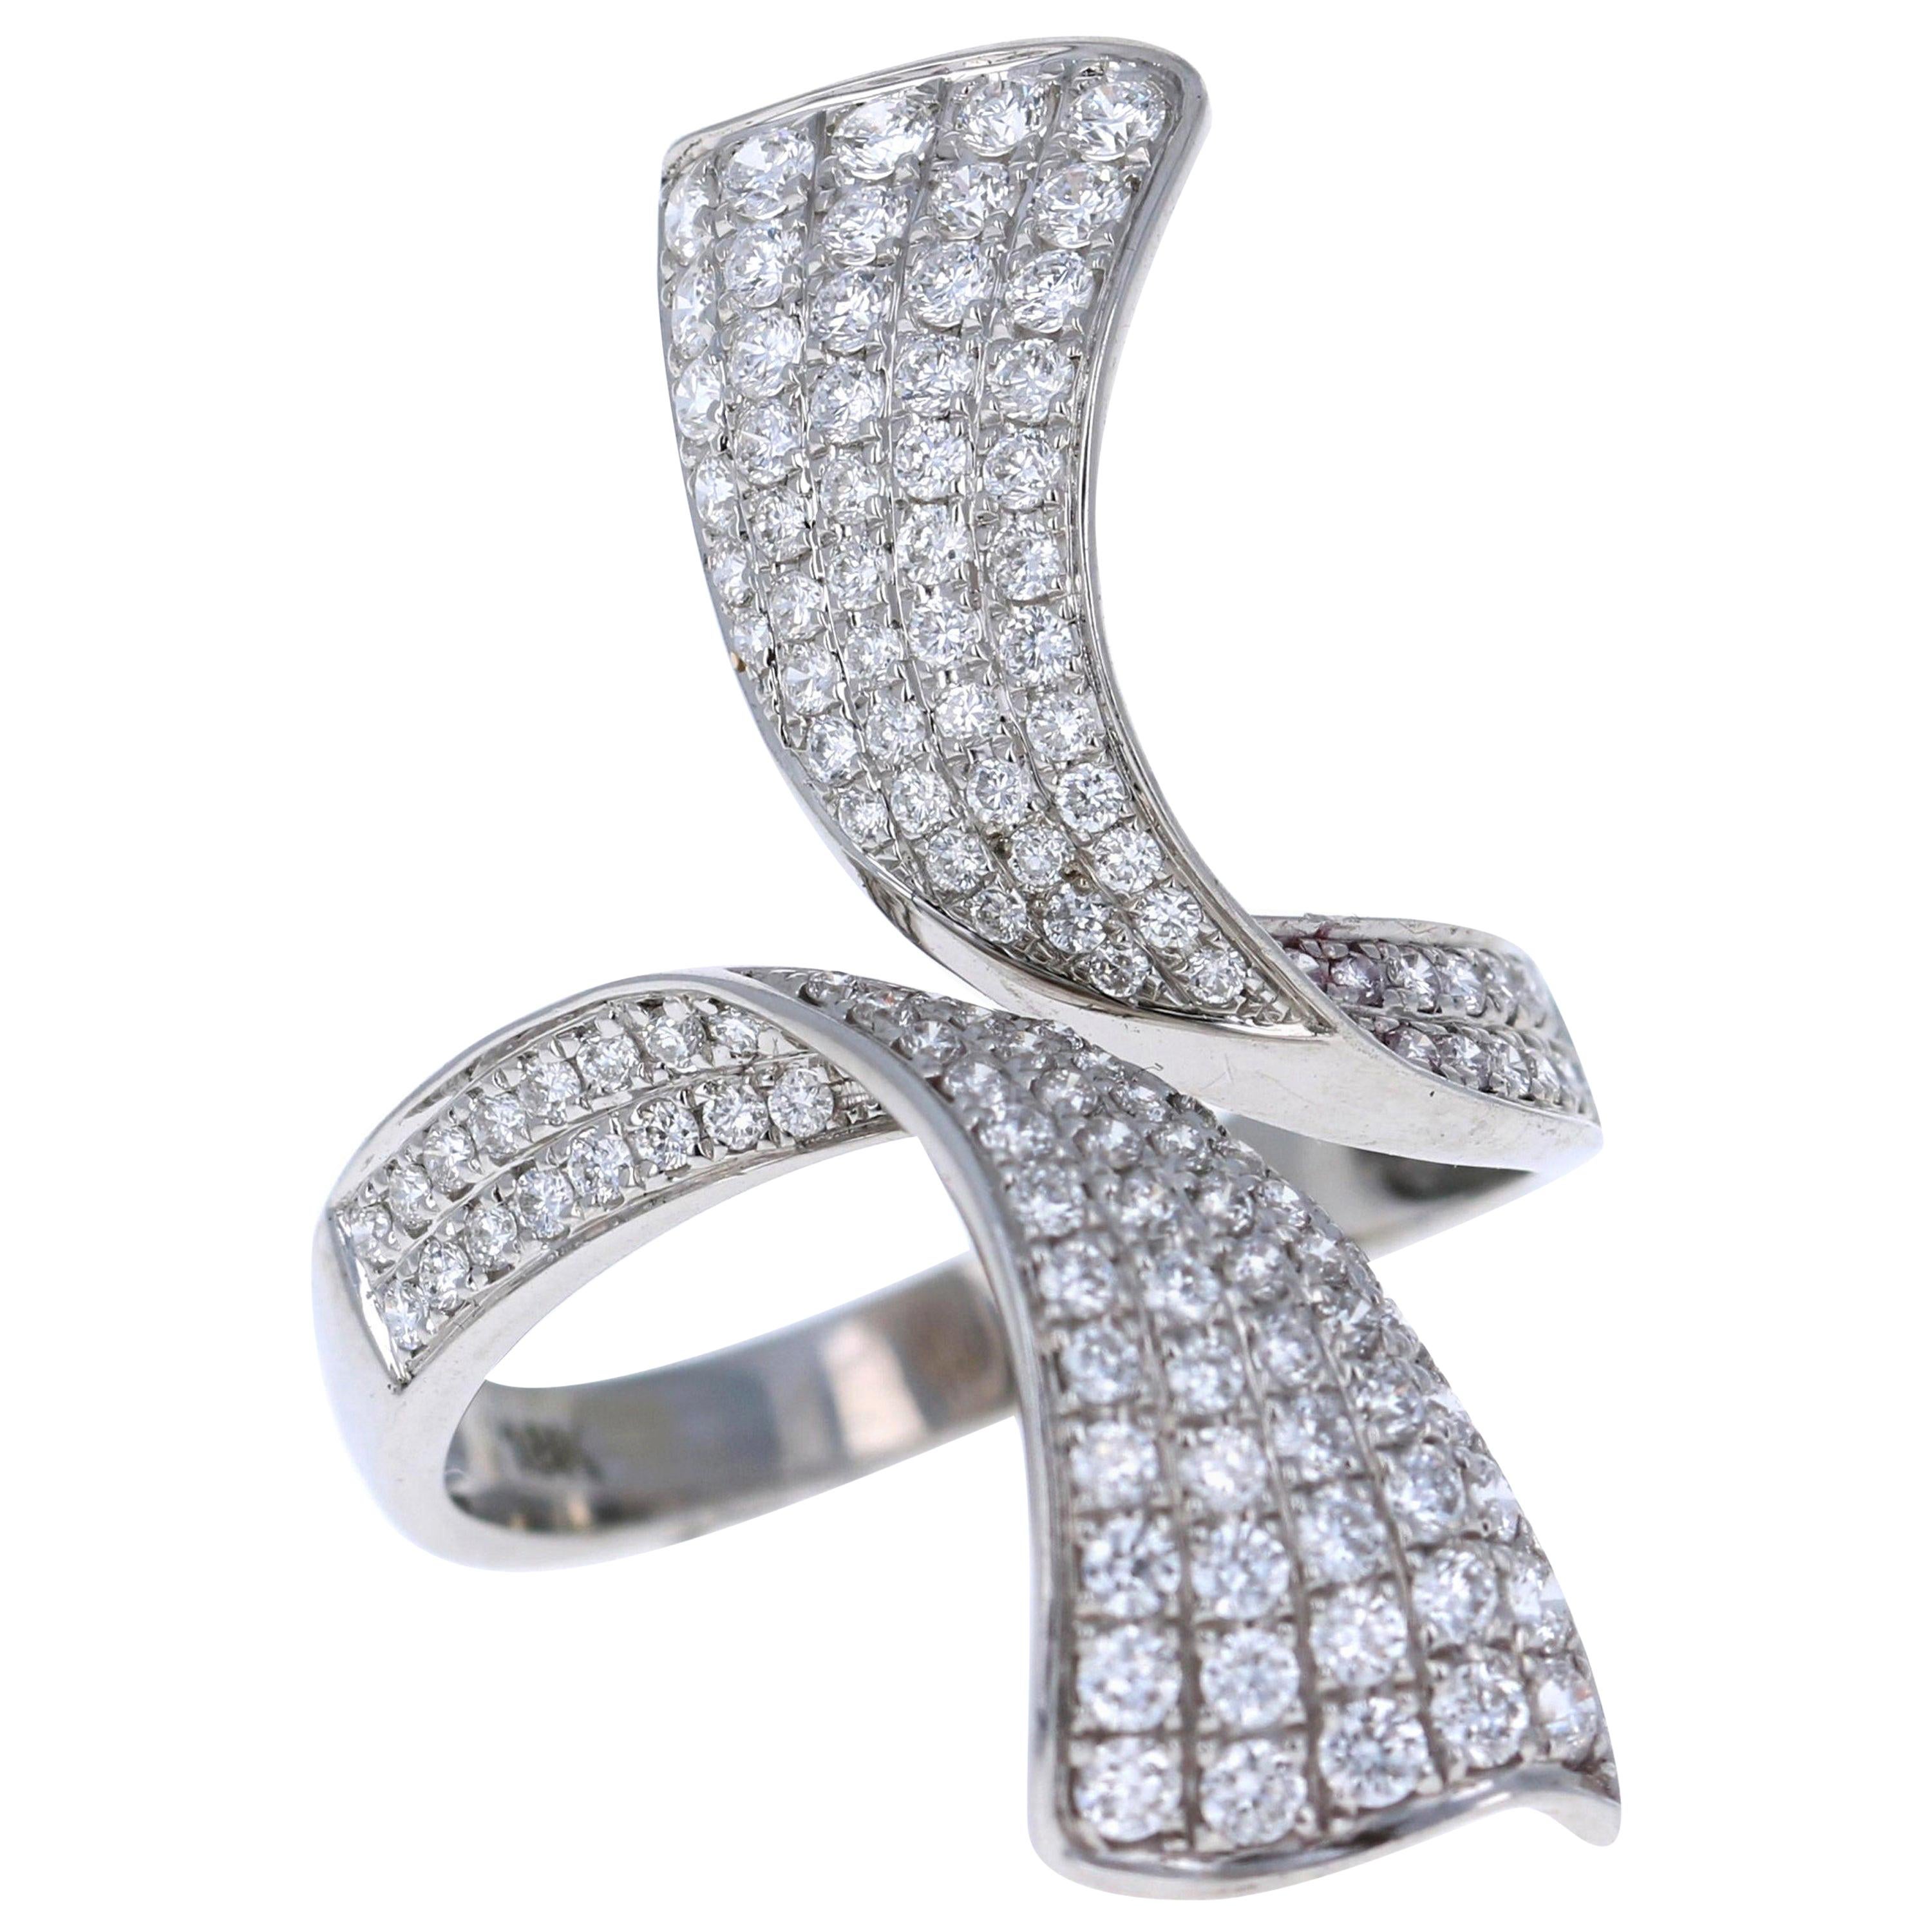 1.09 Carat Round Cut Diamond White Gold Cocktail Ring For Sale